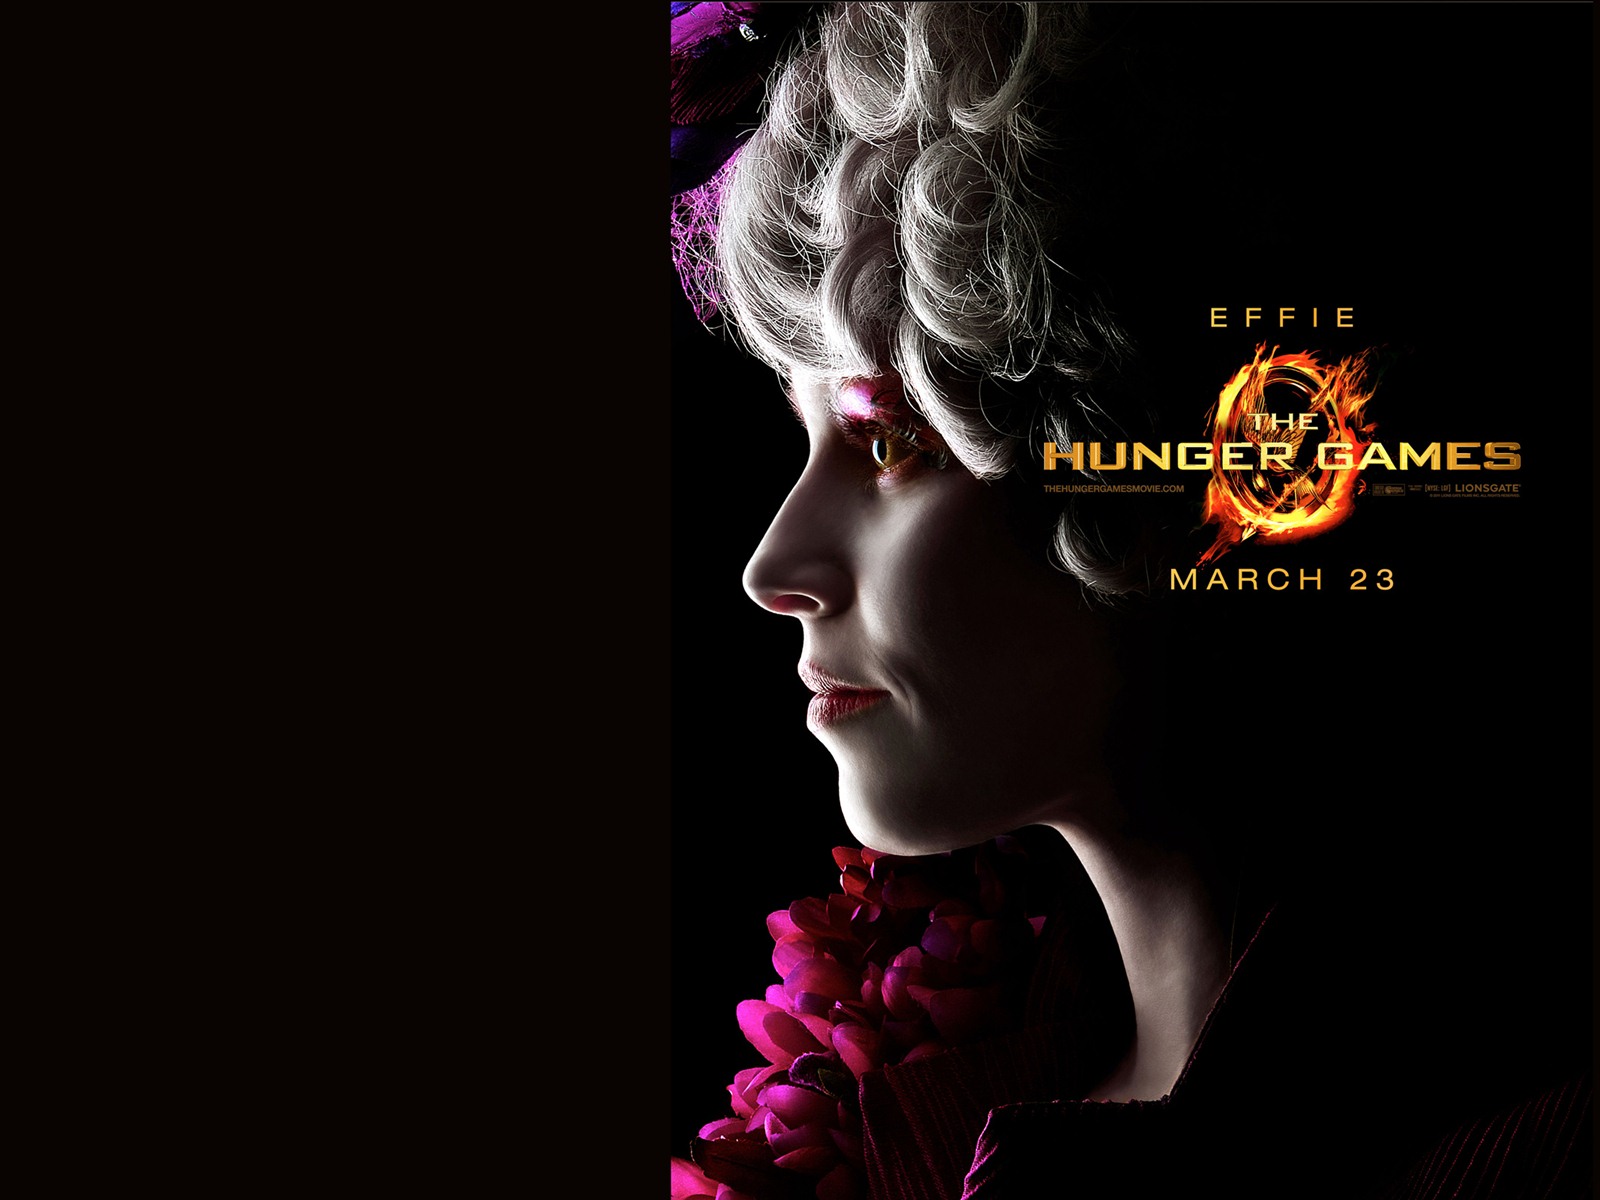 The Hunger Games HD wallpapers #10 - 1600x1200